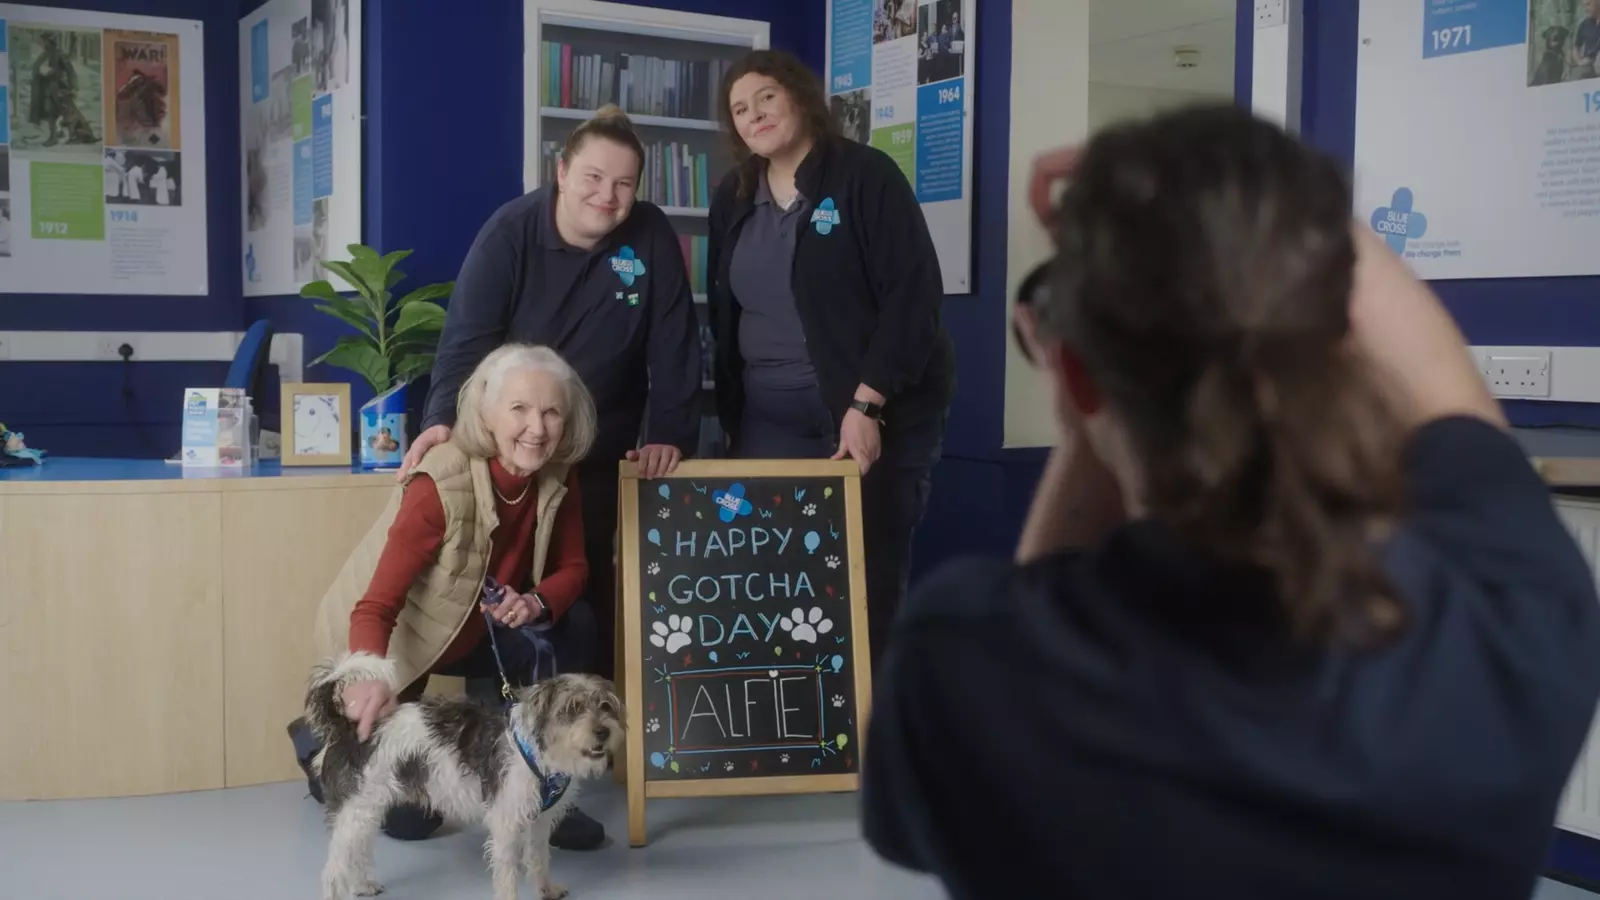 A new owner with dog, Alfie, besides a sign reading 'Happy Gotcha Day Alfie' with some Blue Cross staff